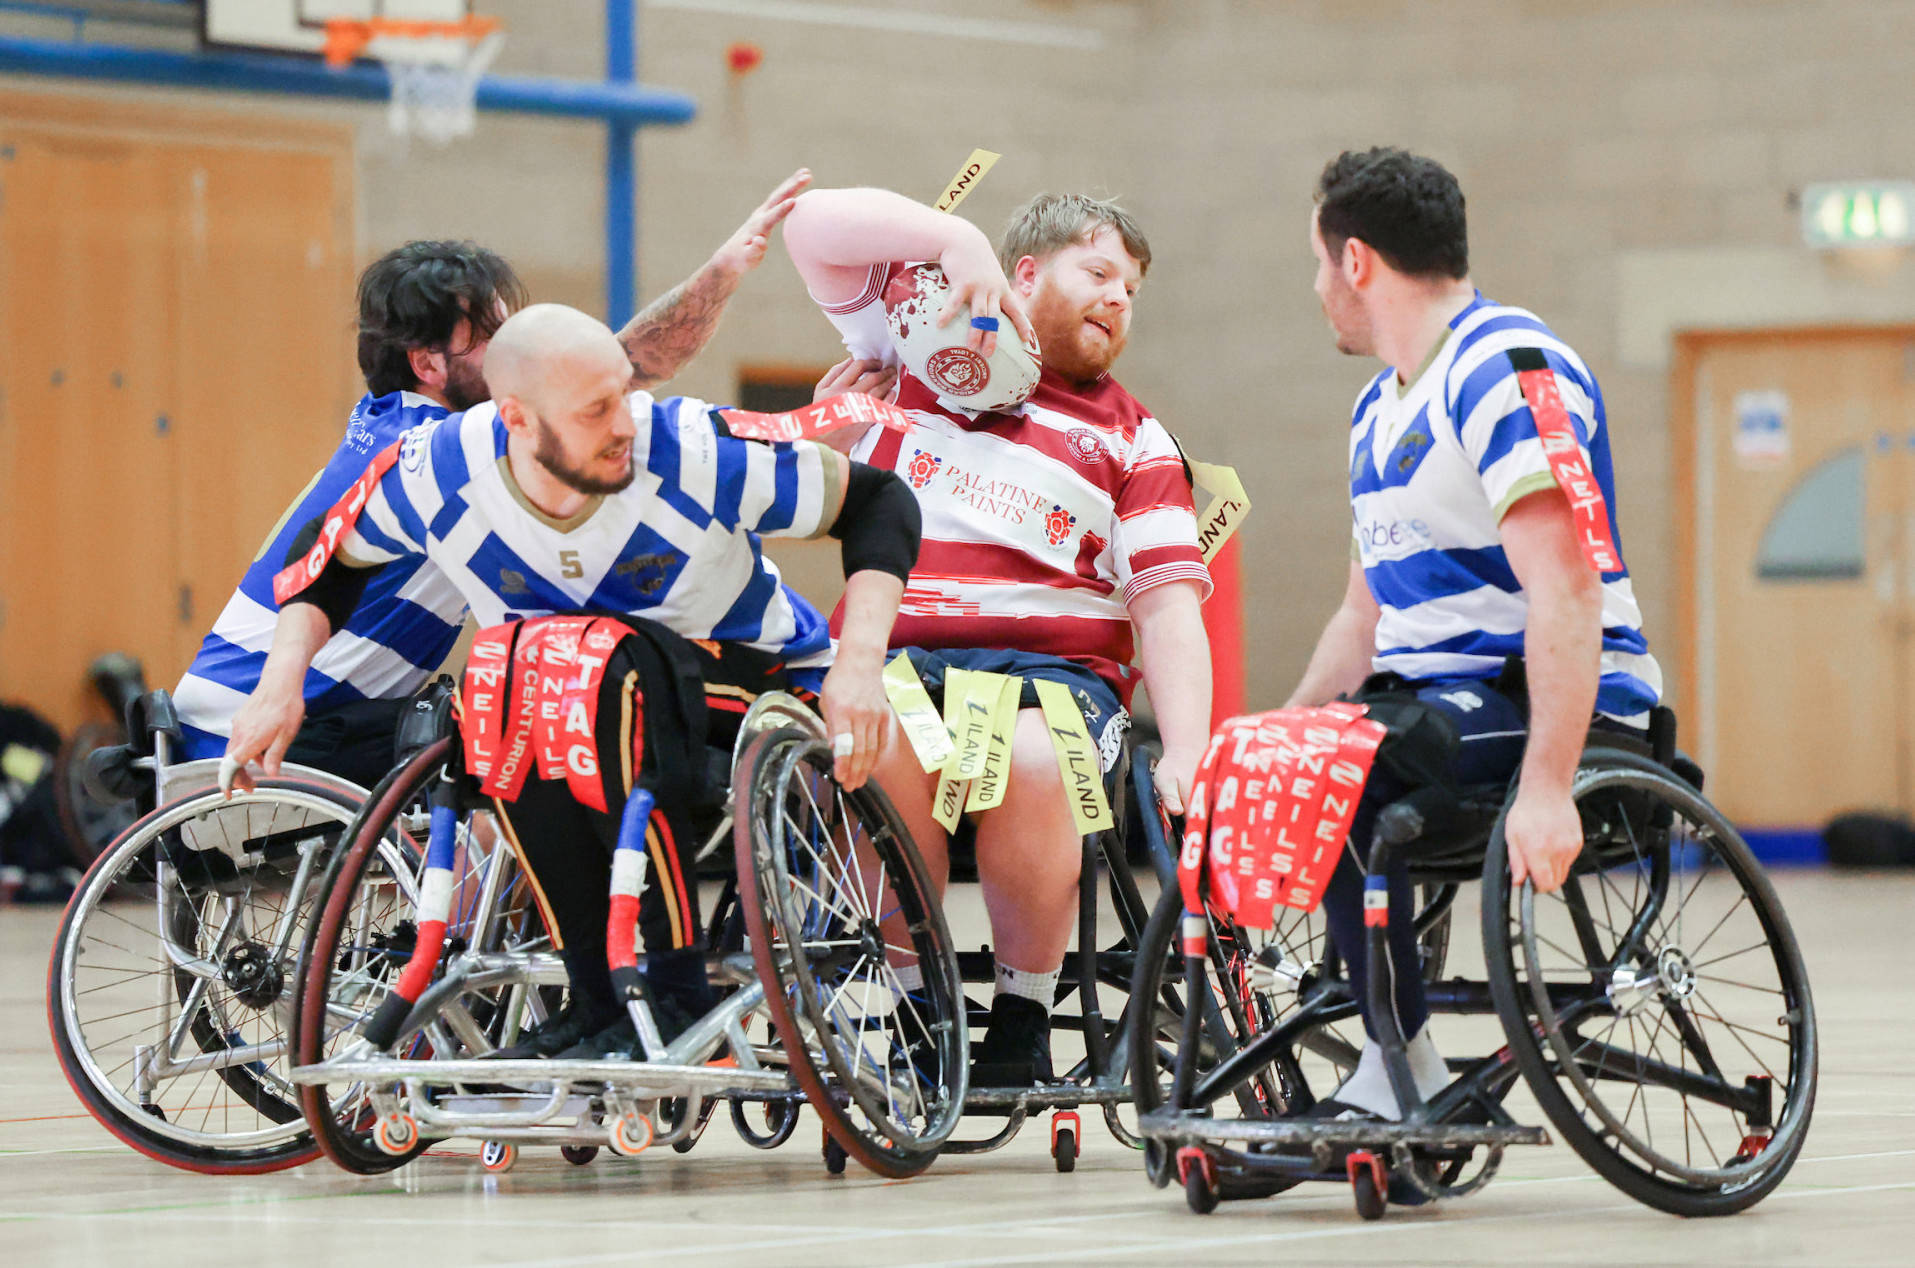 Betfred Wheelchair Super League ready for action packed weekend in Birmingham